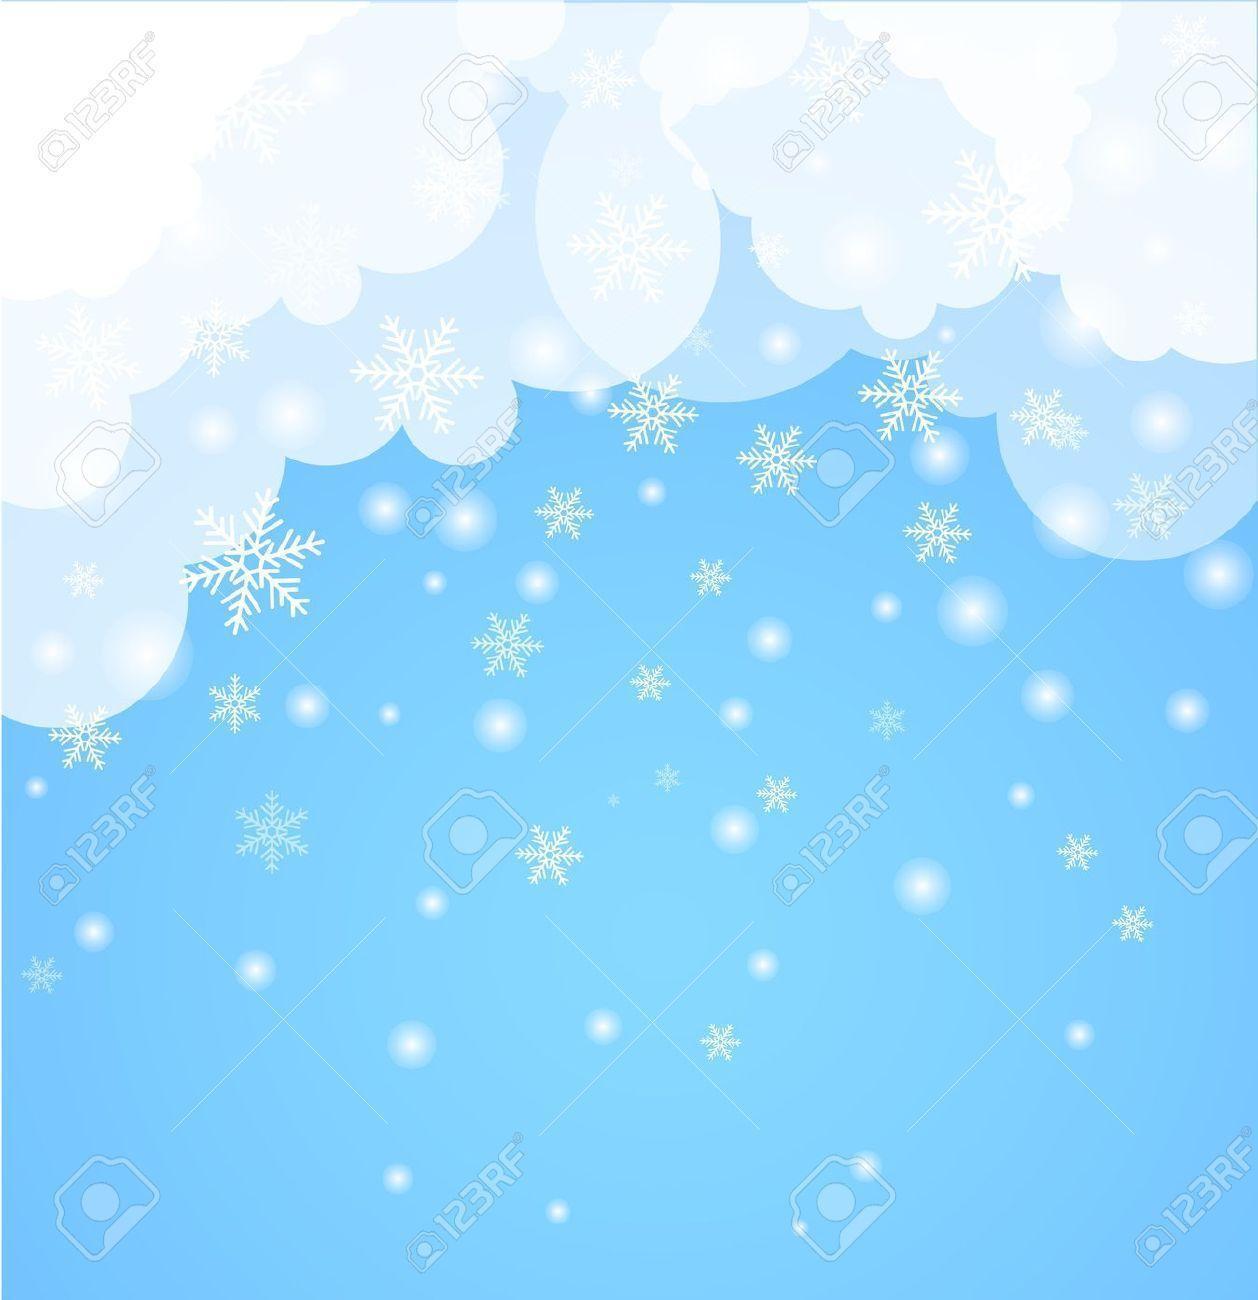 Abstract Background Winter Theme Royalty Free Clipart, Vectors